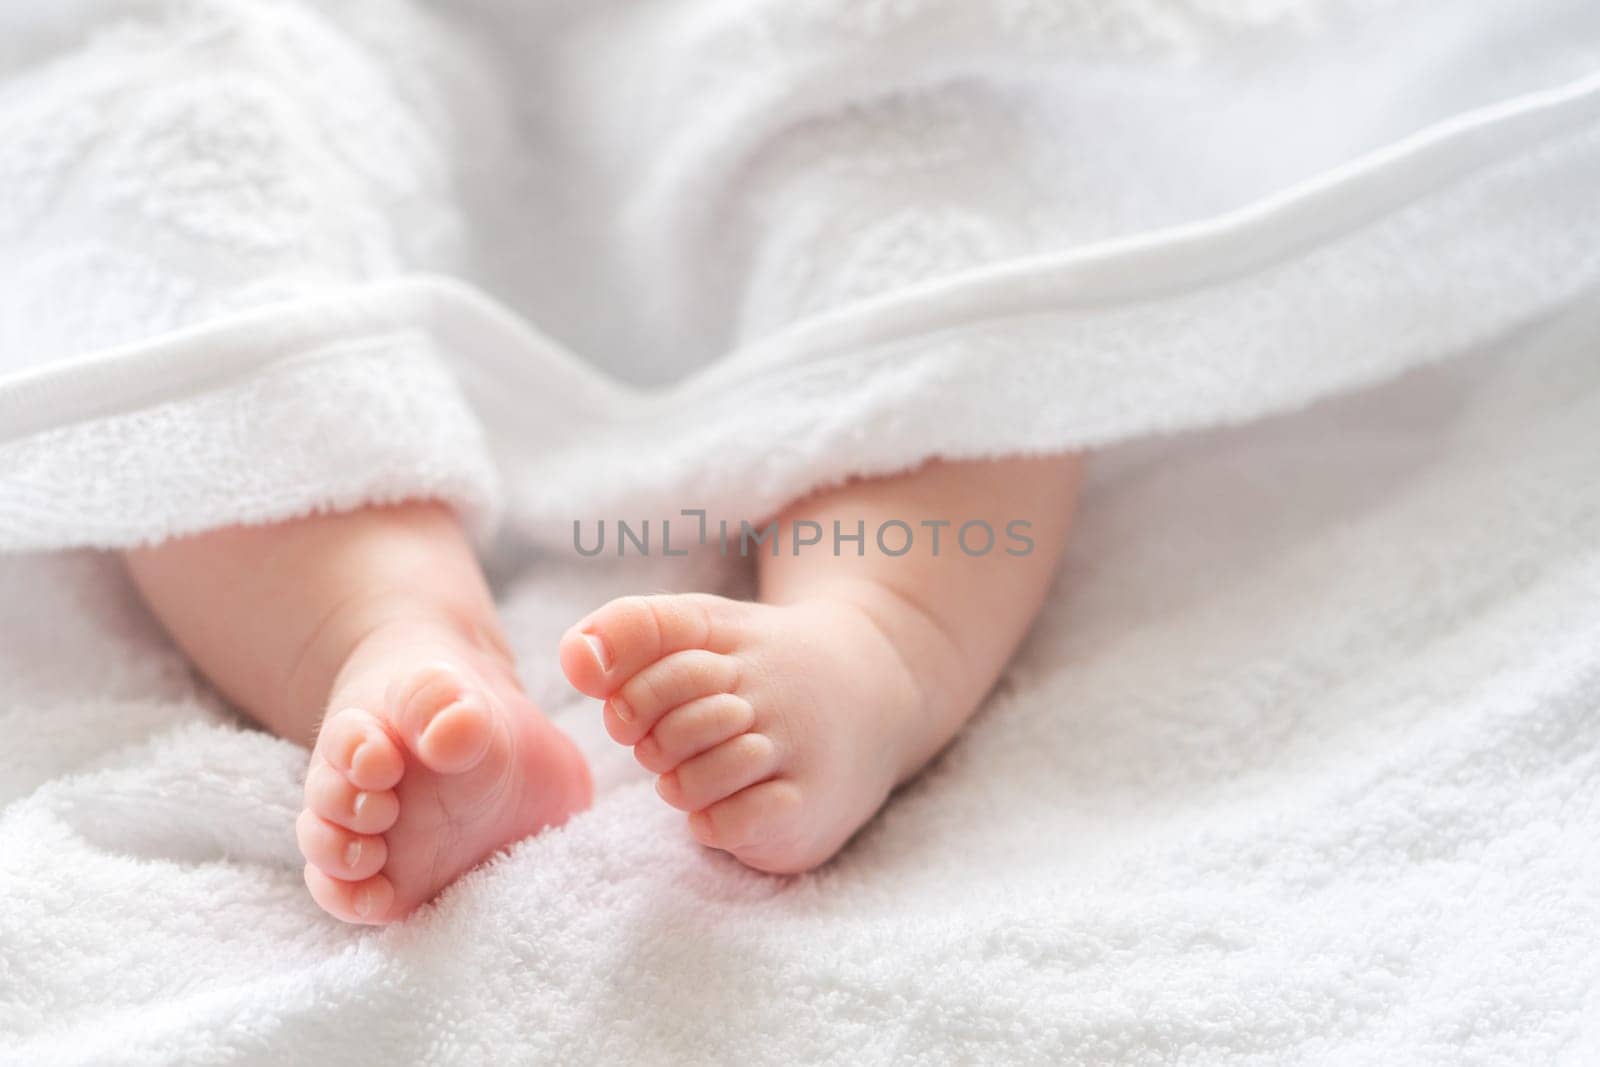 Child's feet and legs peeking, wrapped in purity. Concept of infant's delicate bath moments by Mariakray